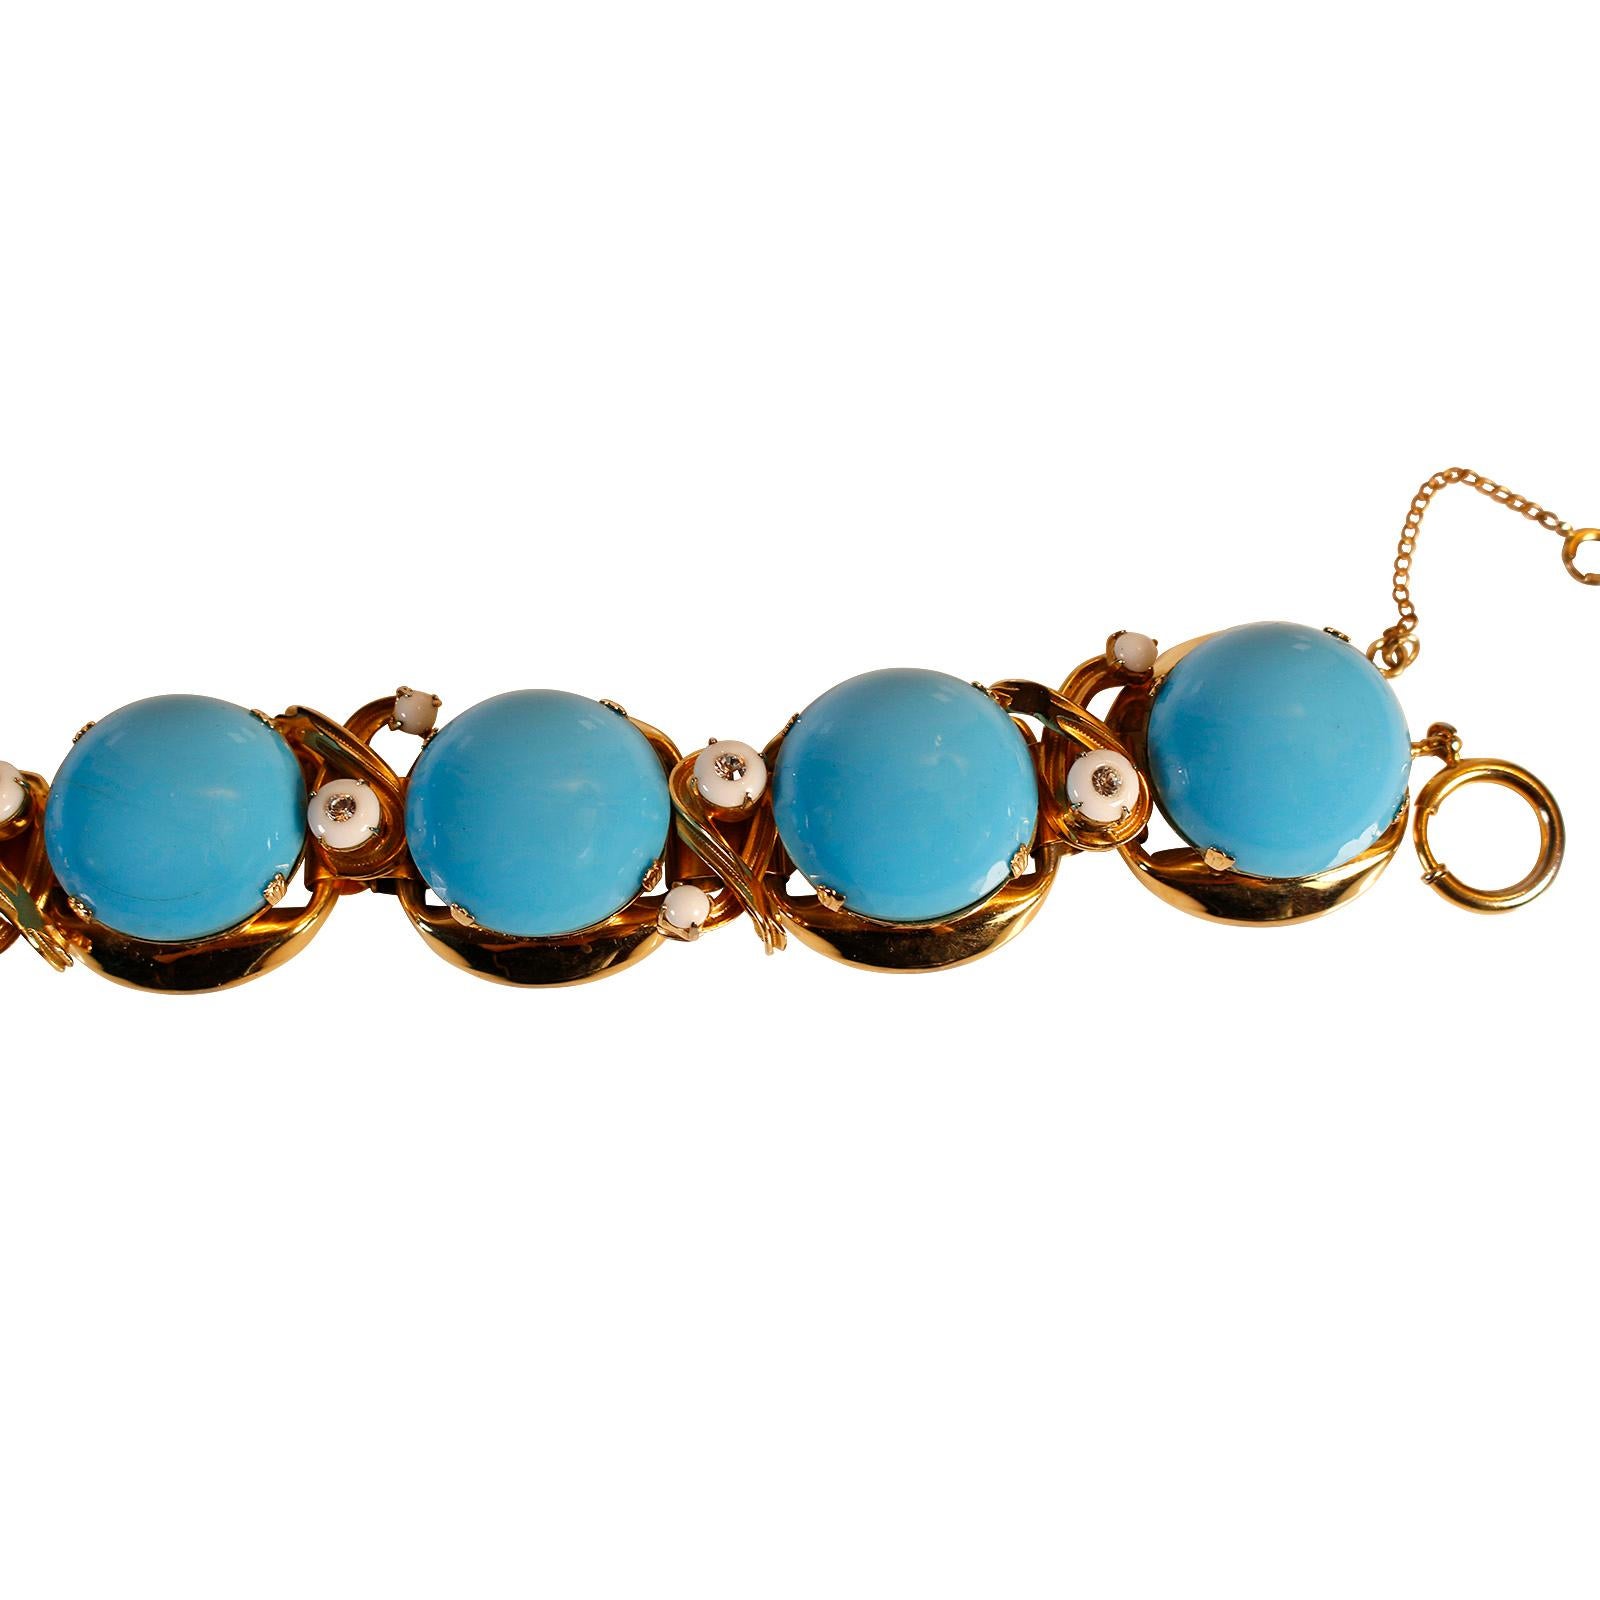 Vintage Unsigned Gold and Faux Turquoise Bracelet Circa 1960s For Sale 5